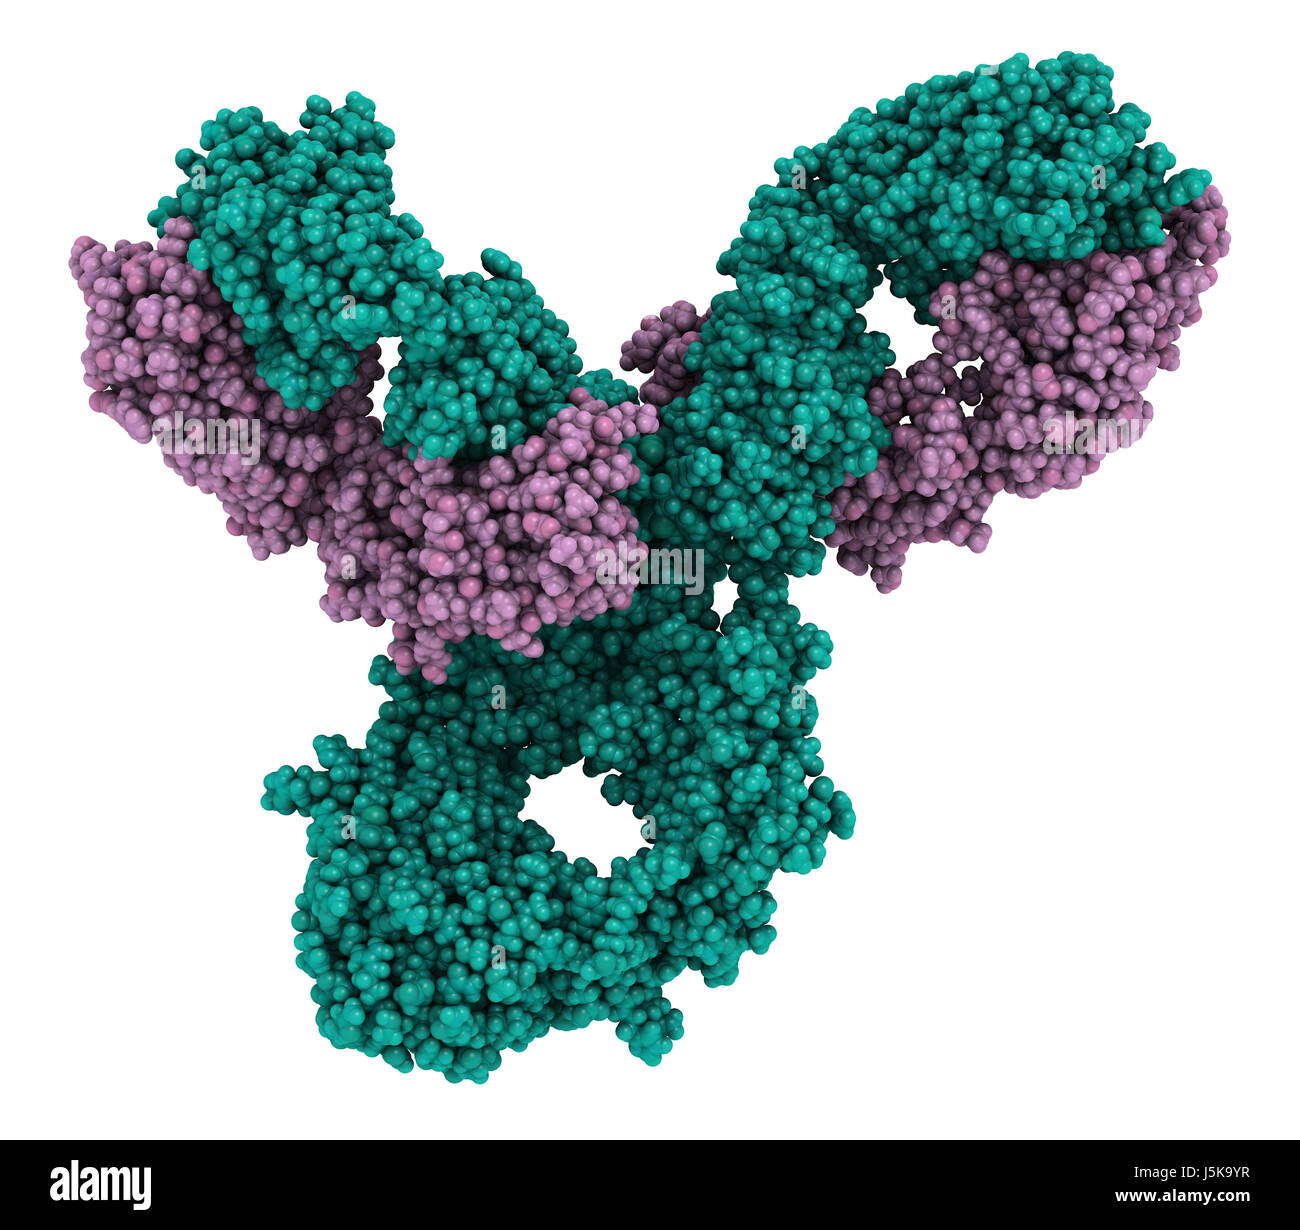 Pembrolizumab monoclonal antibody drug protein. Immune checkpoint inhibitor targetting PD-1, used in the treatment of a number of cancers. Stock Photo